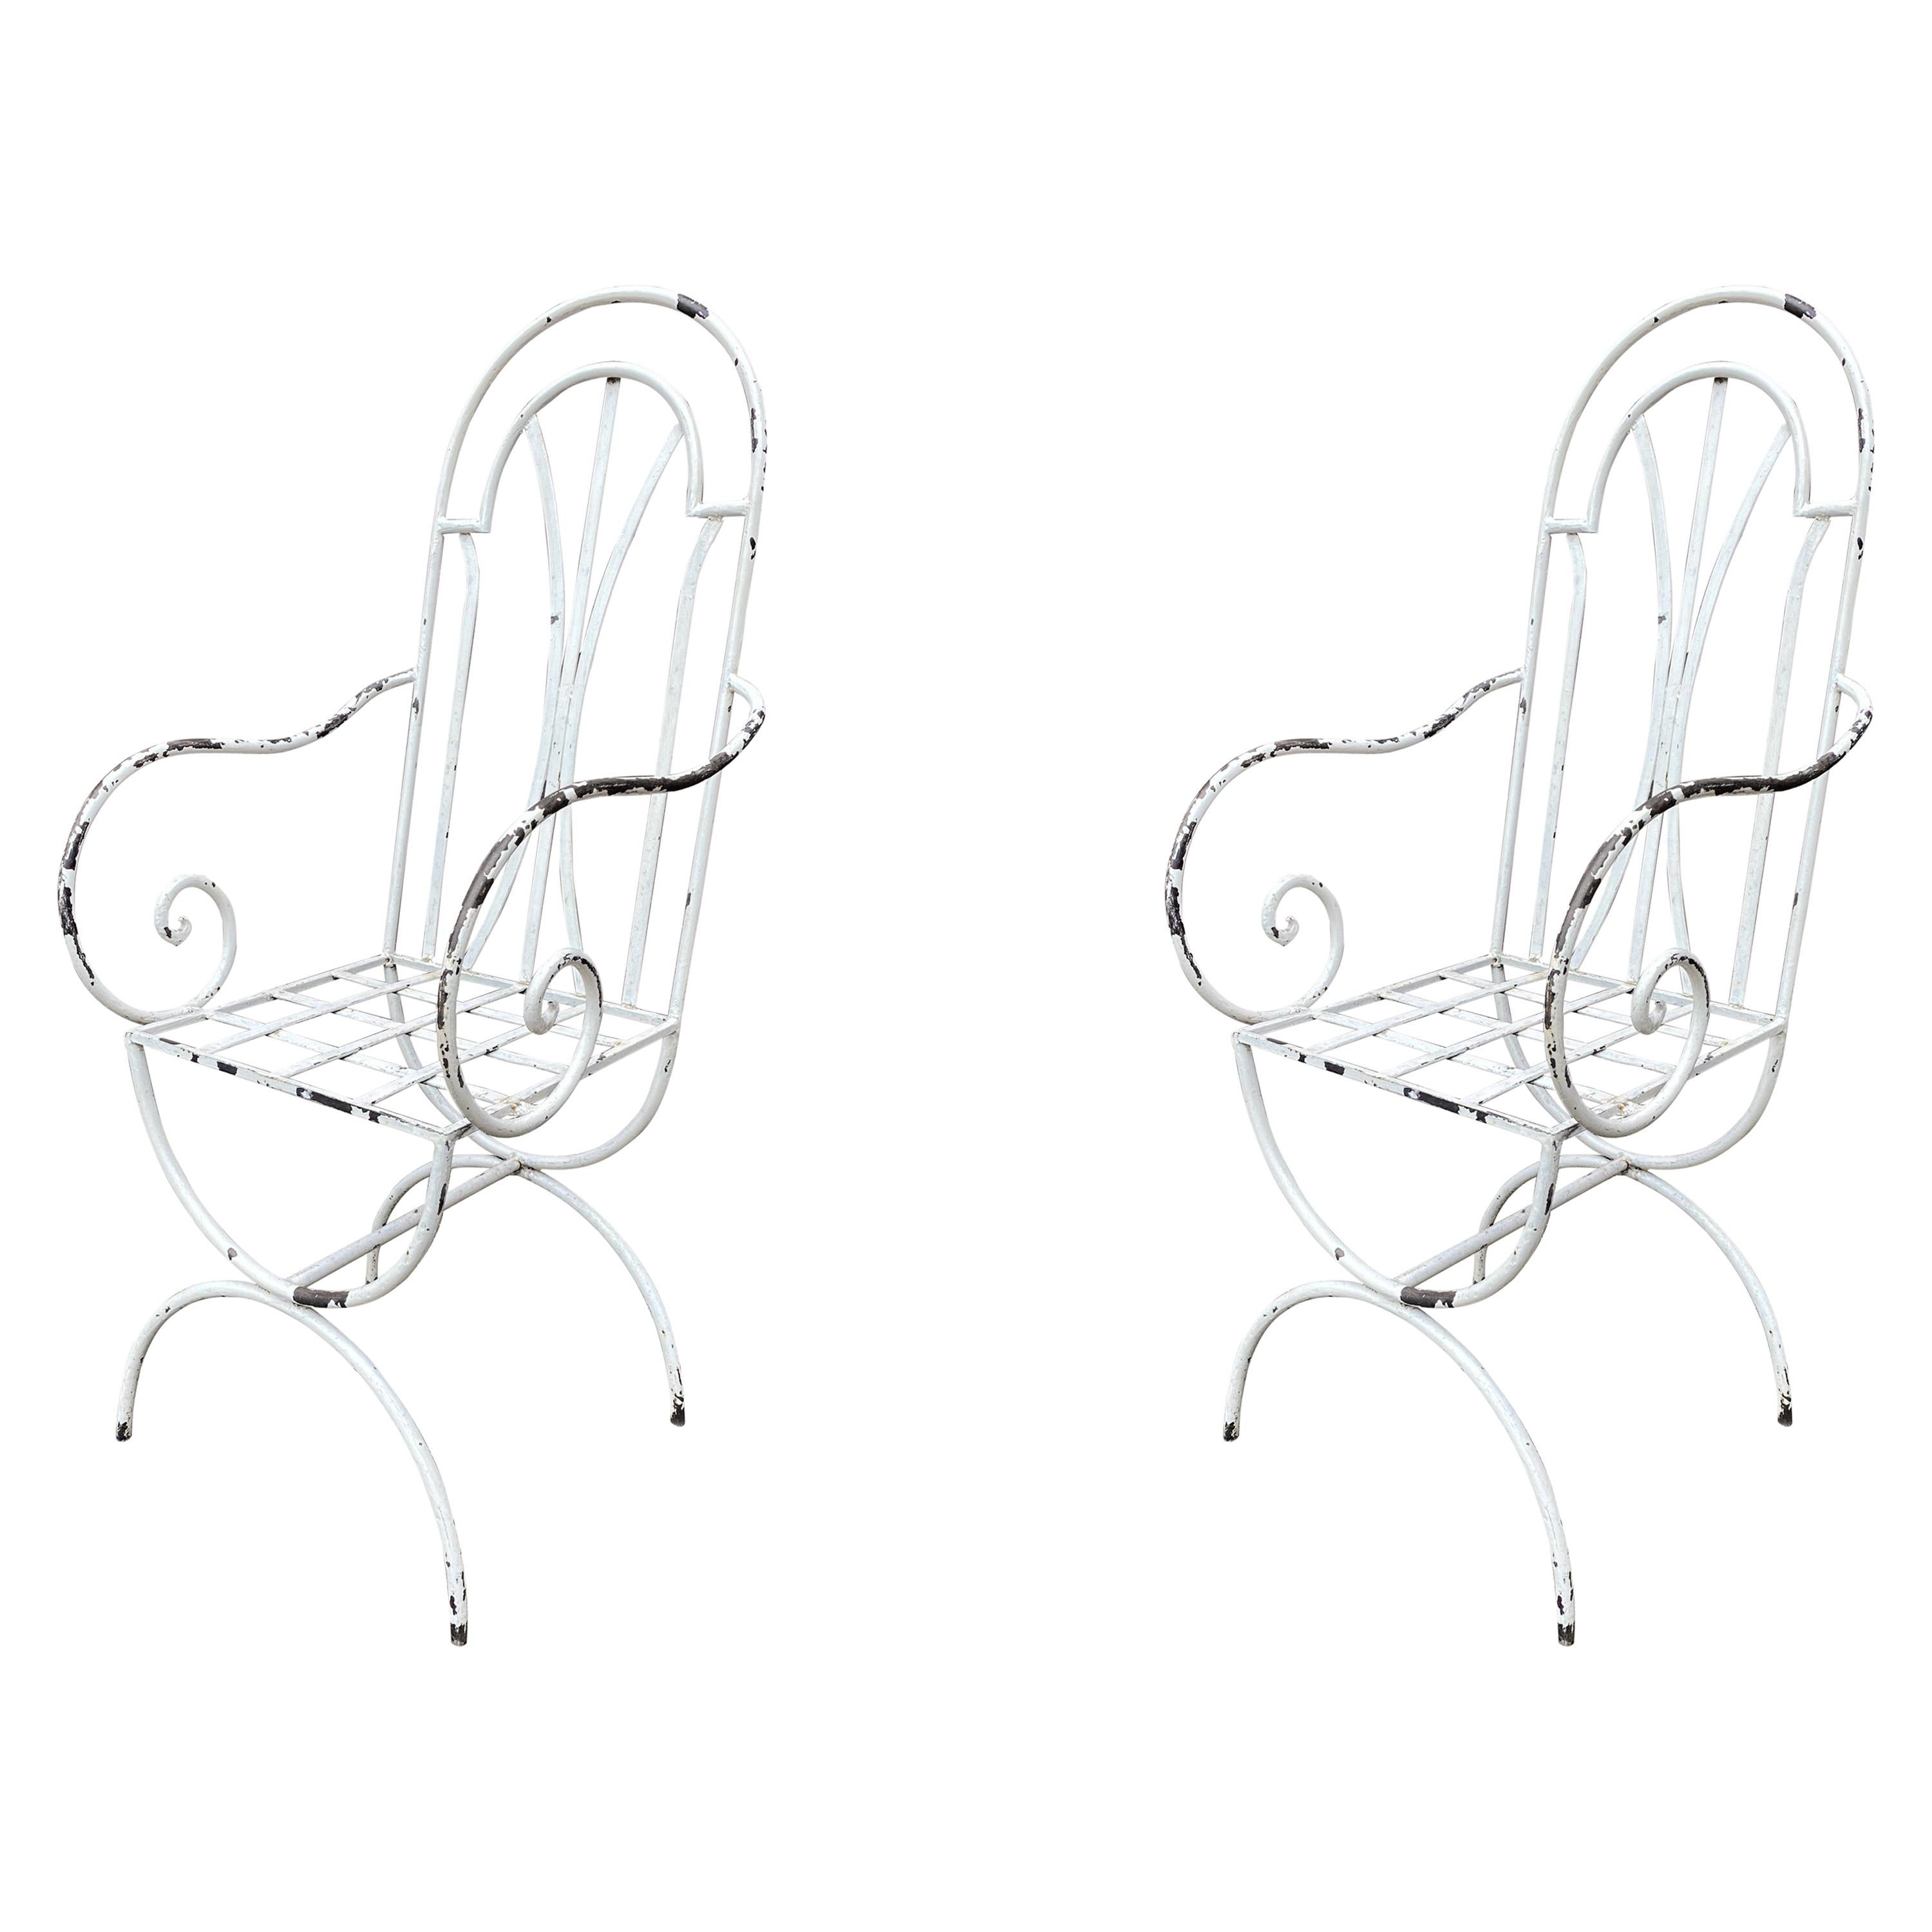 What is the best garden chair?